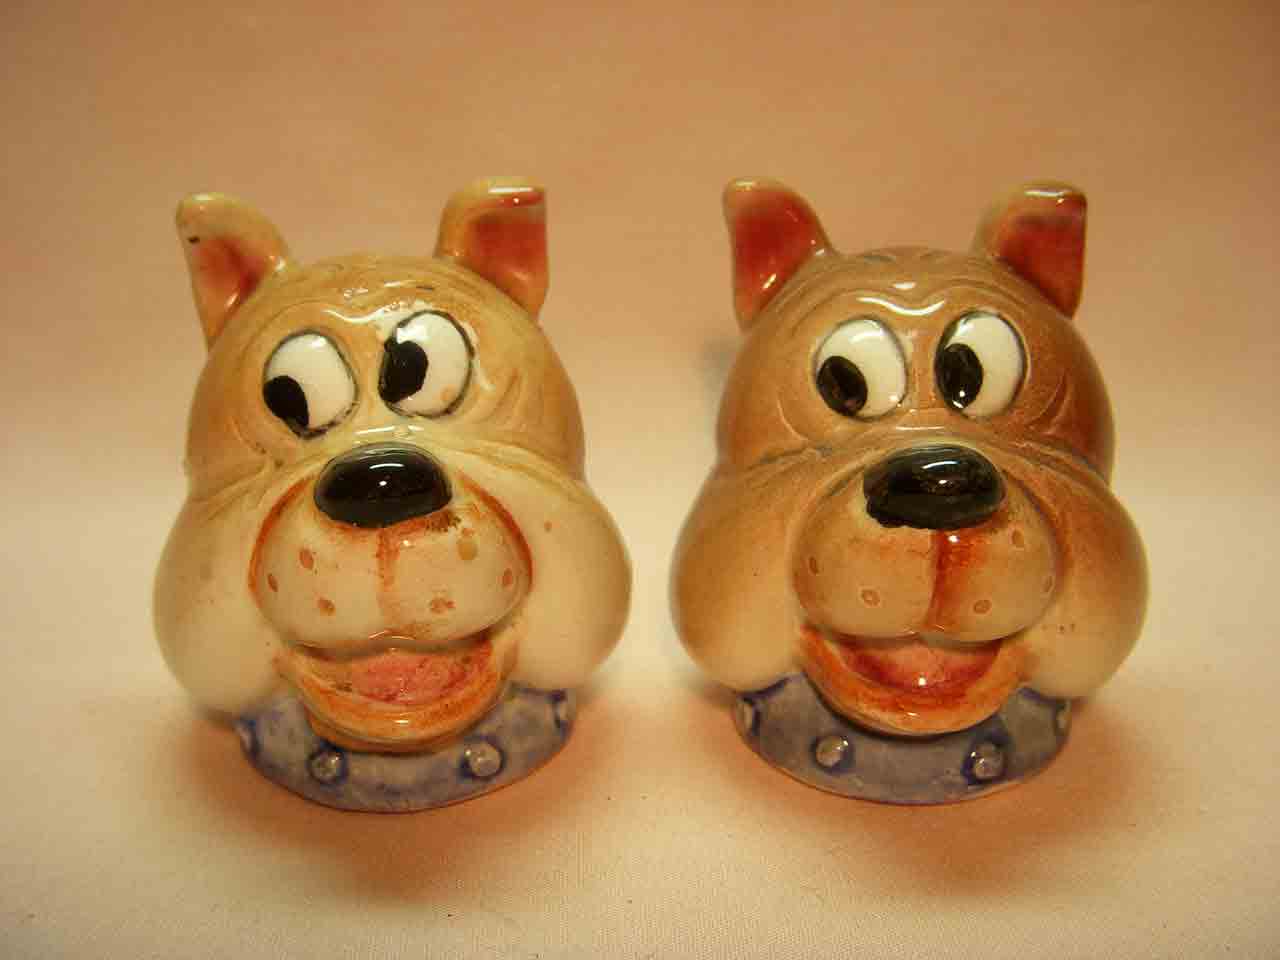 Characters from MGM Studios salt and pepper shakers - Spike